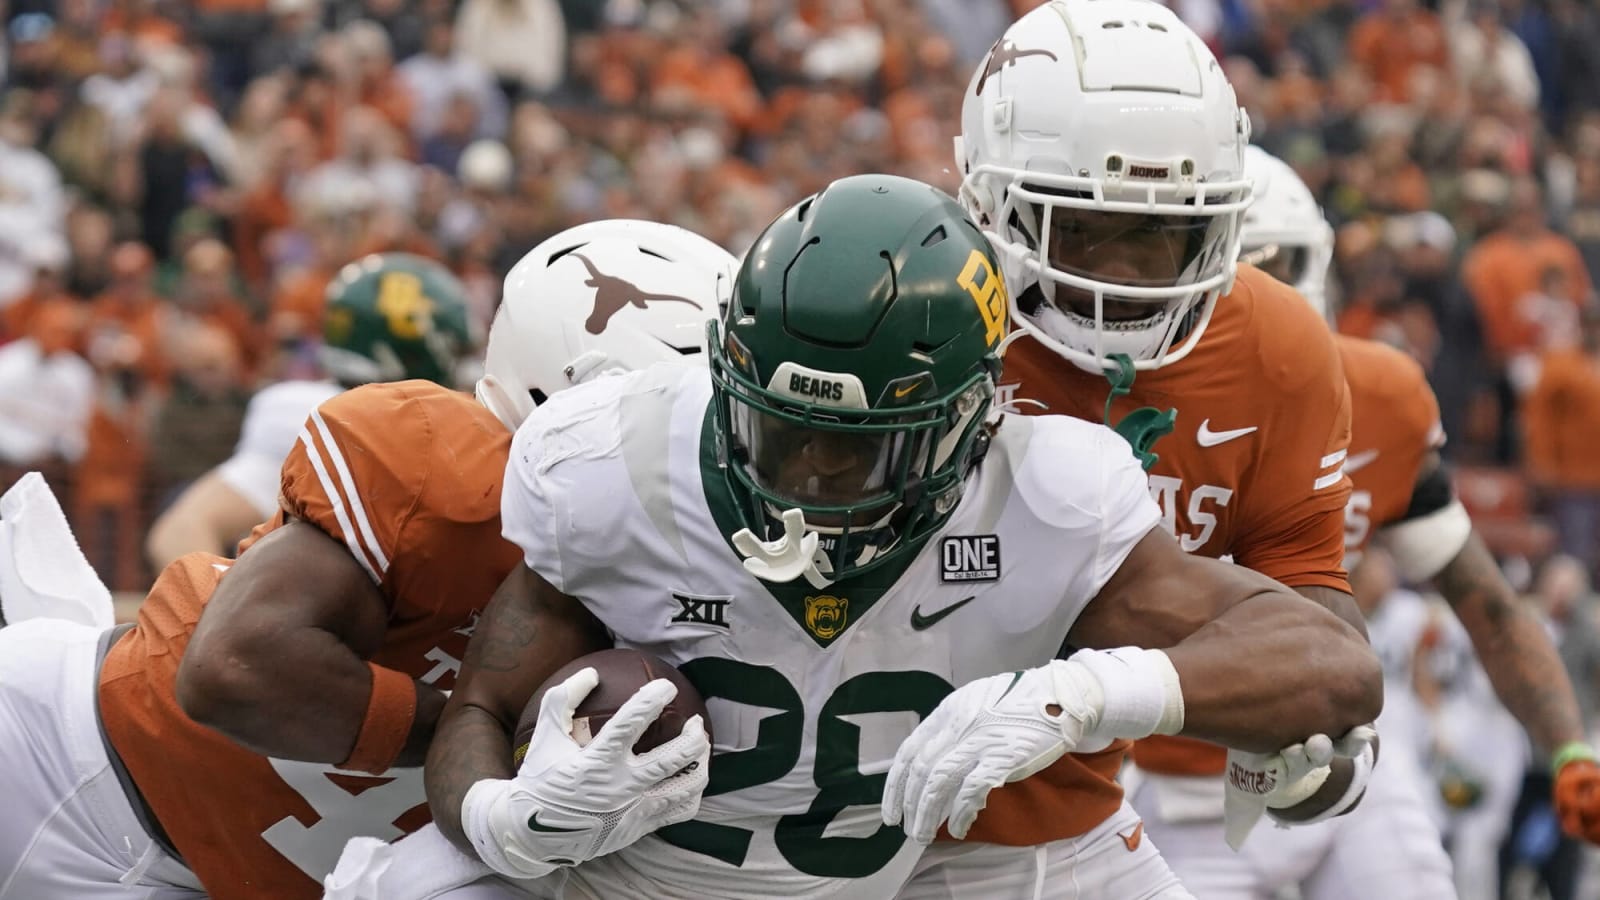 NCAAF futures, Baylor win totals: Can Bears flourish in 'new' Big 12?